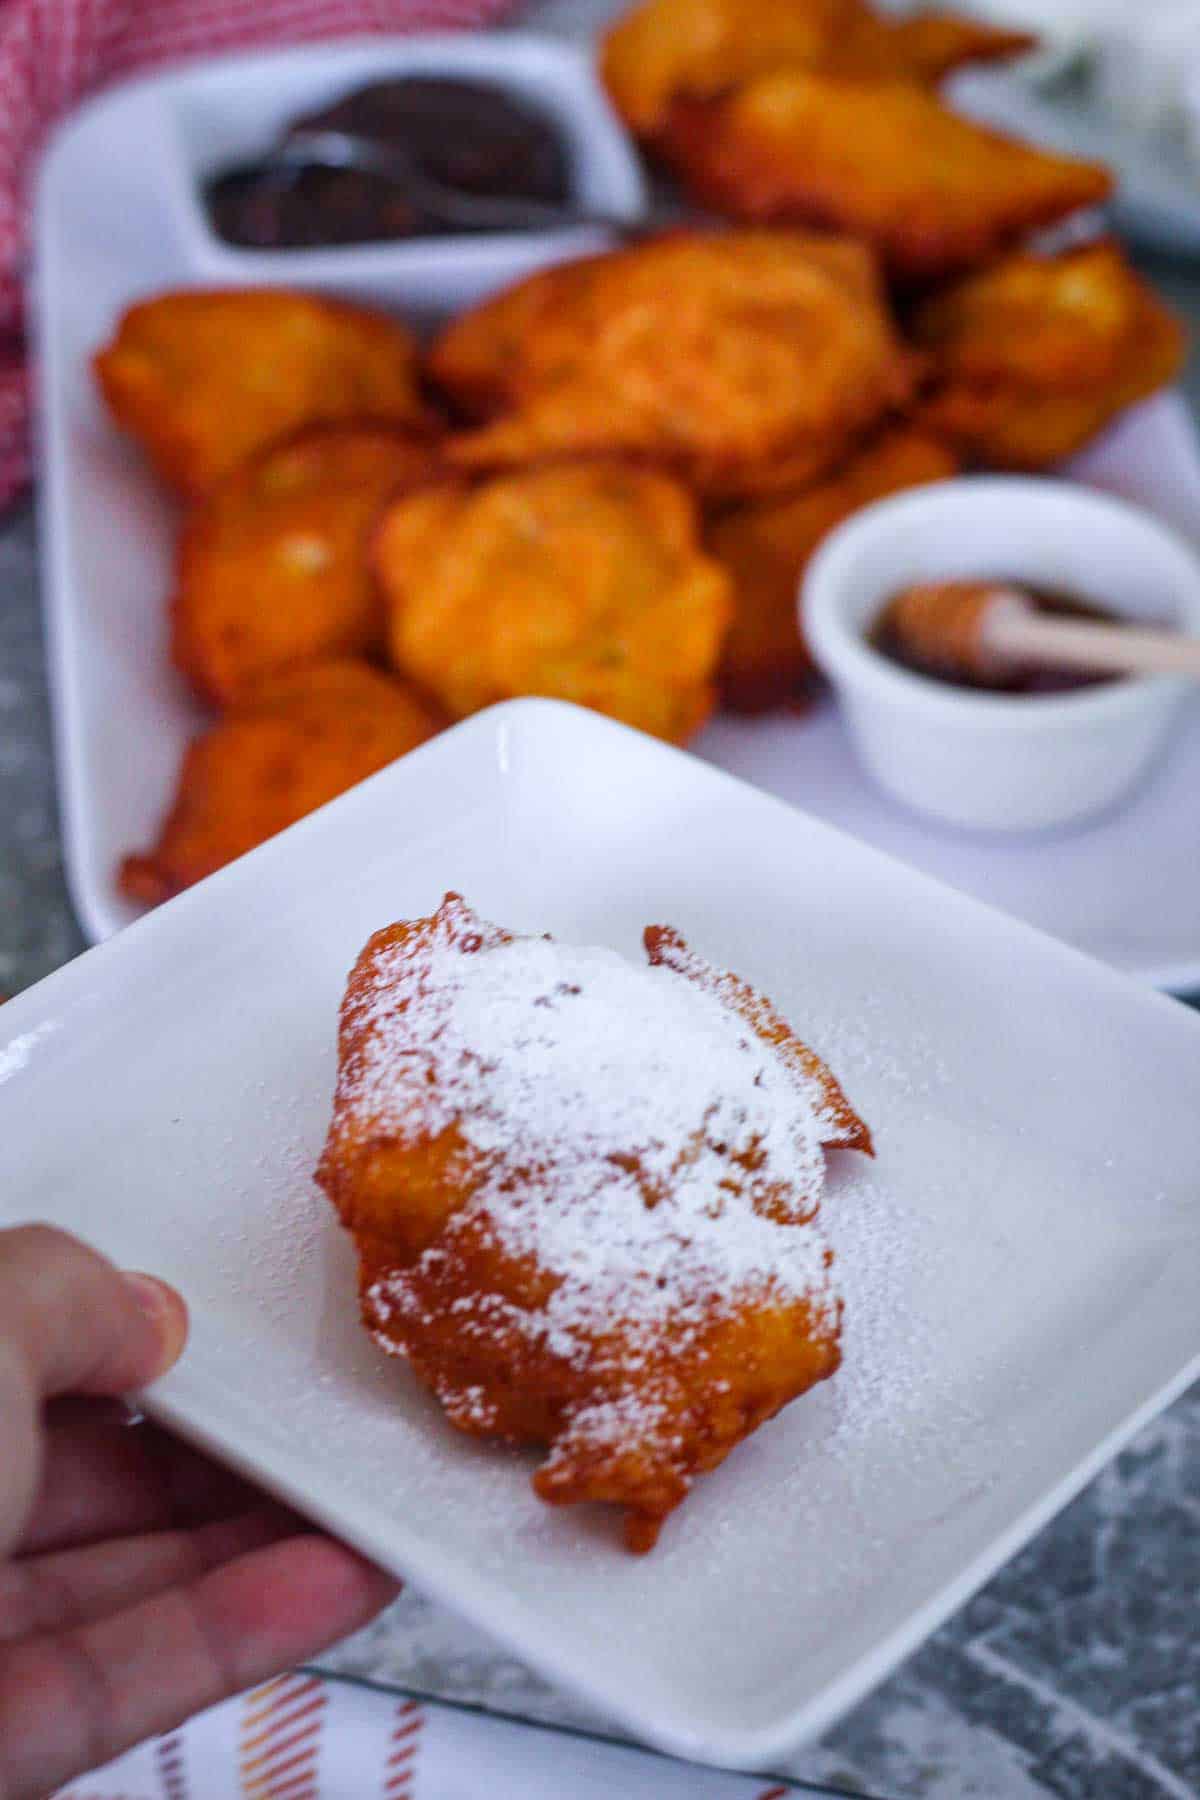 One fried dough (petulla) covered in powder sugar on a plate with the rest of fried petulla on a platter in the background.